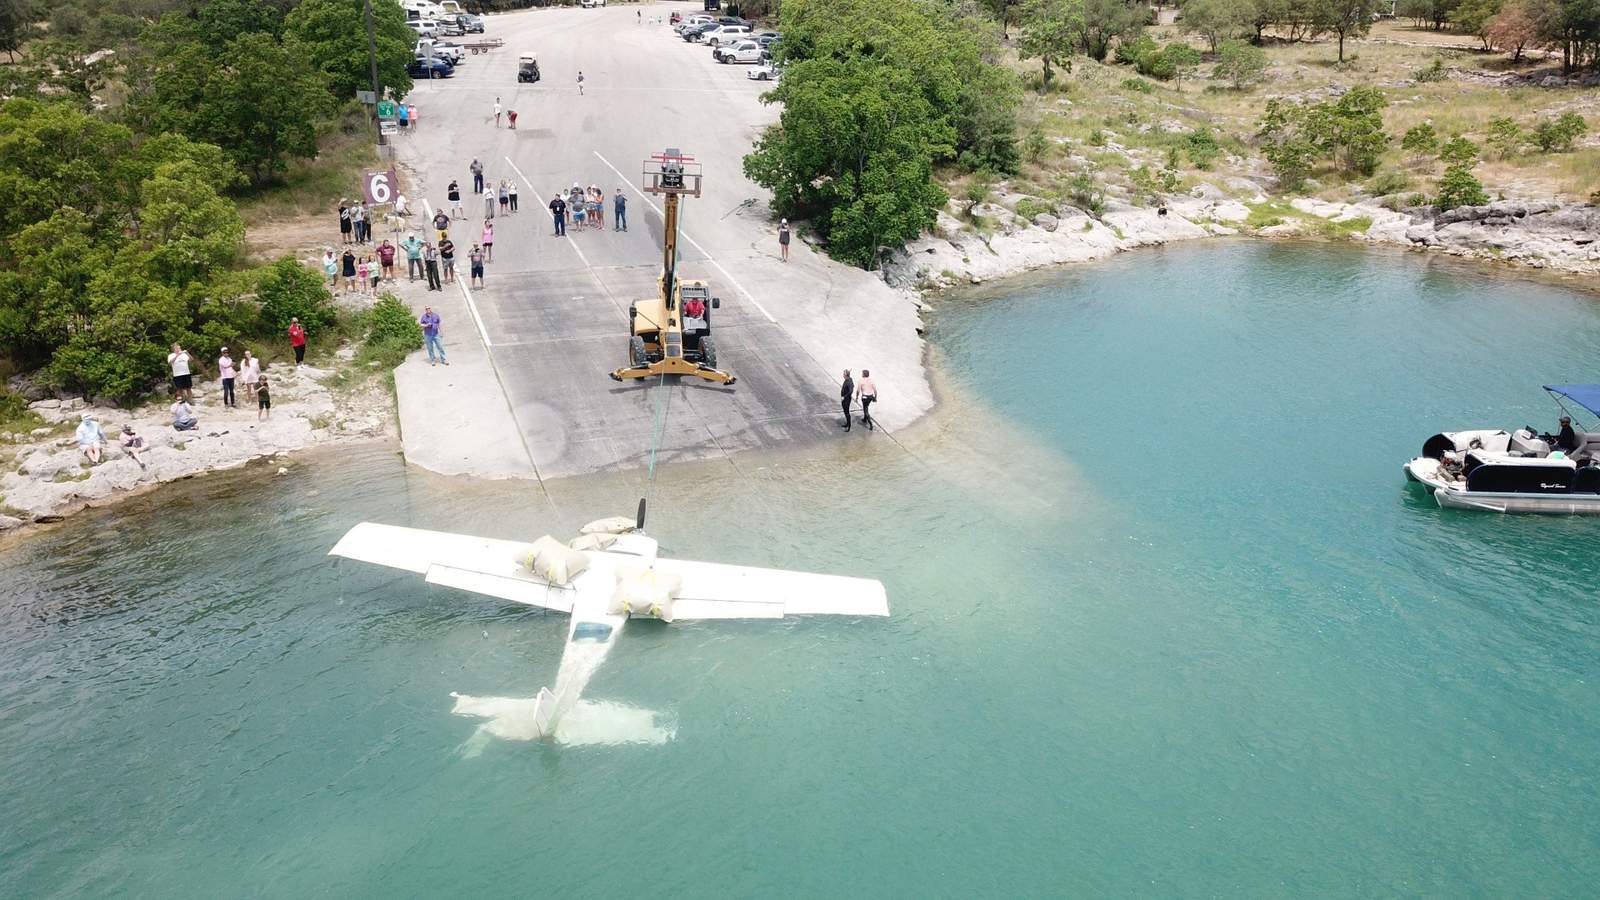 Video shows plane being pulled out of Canyon Lake after emergency landing